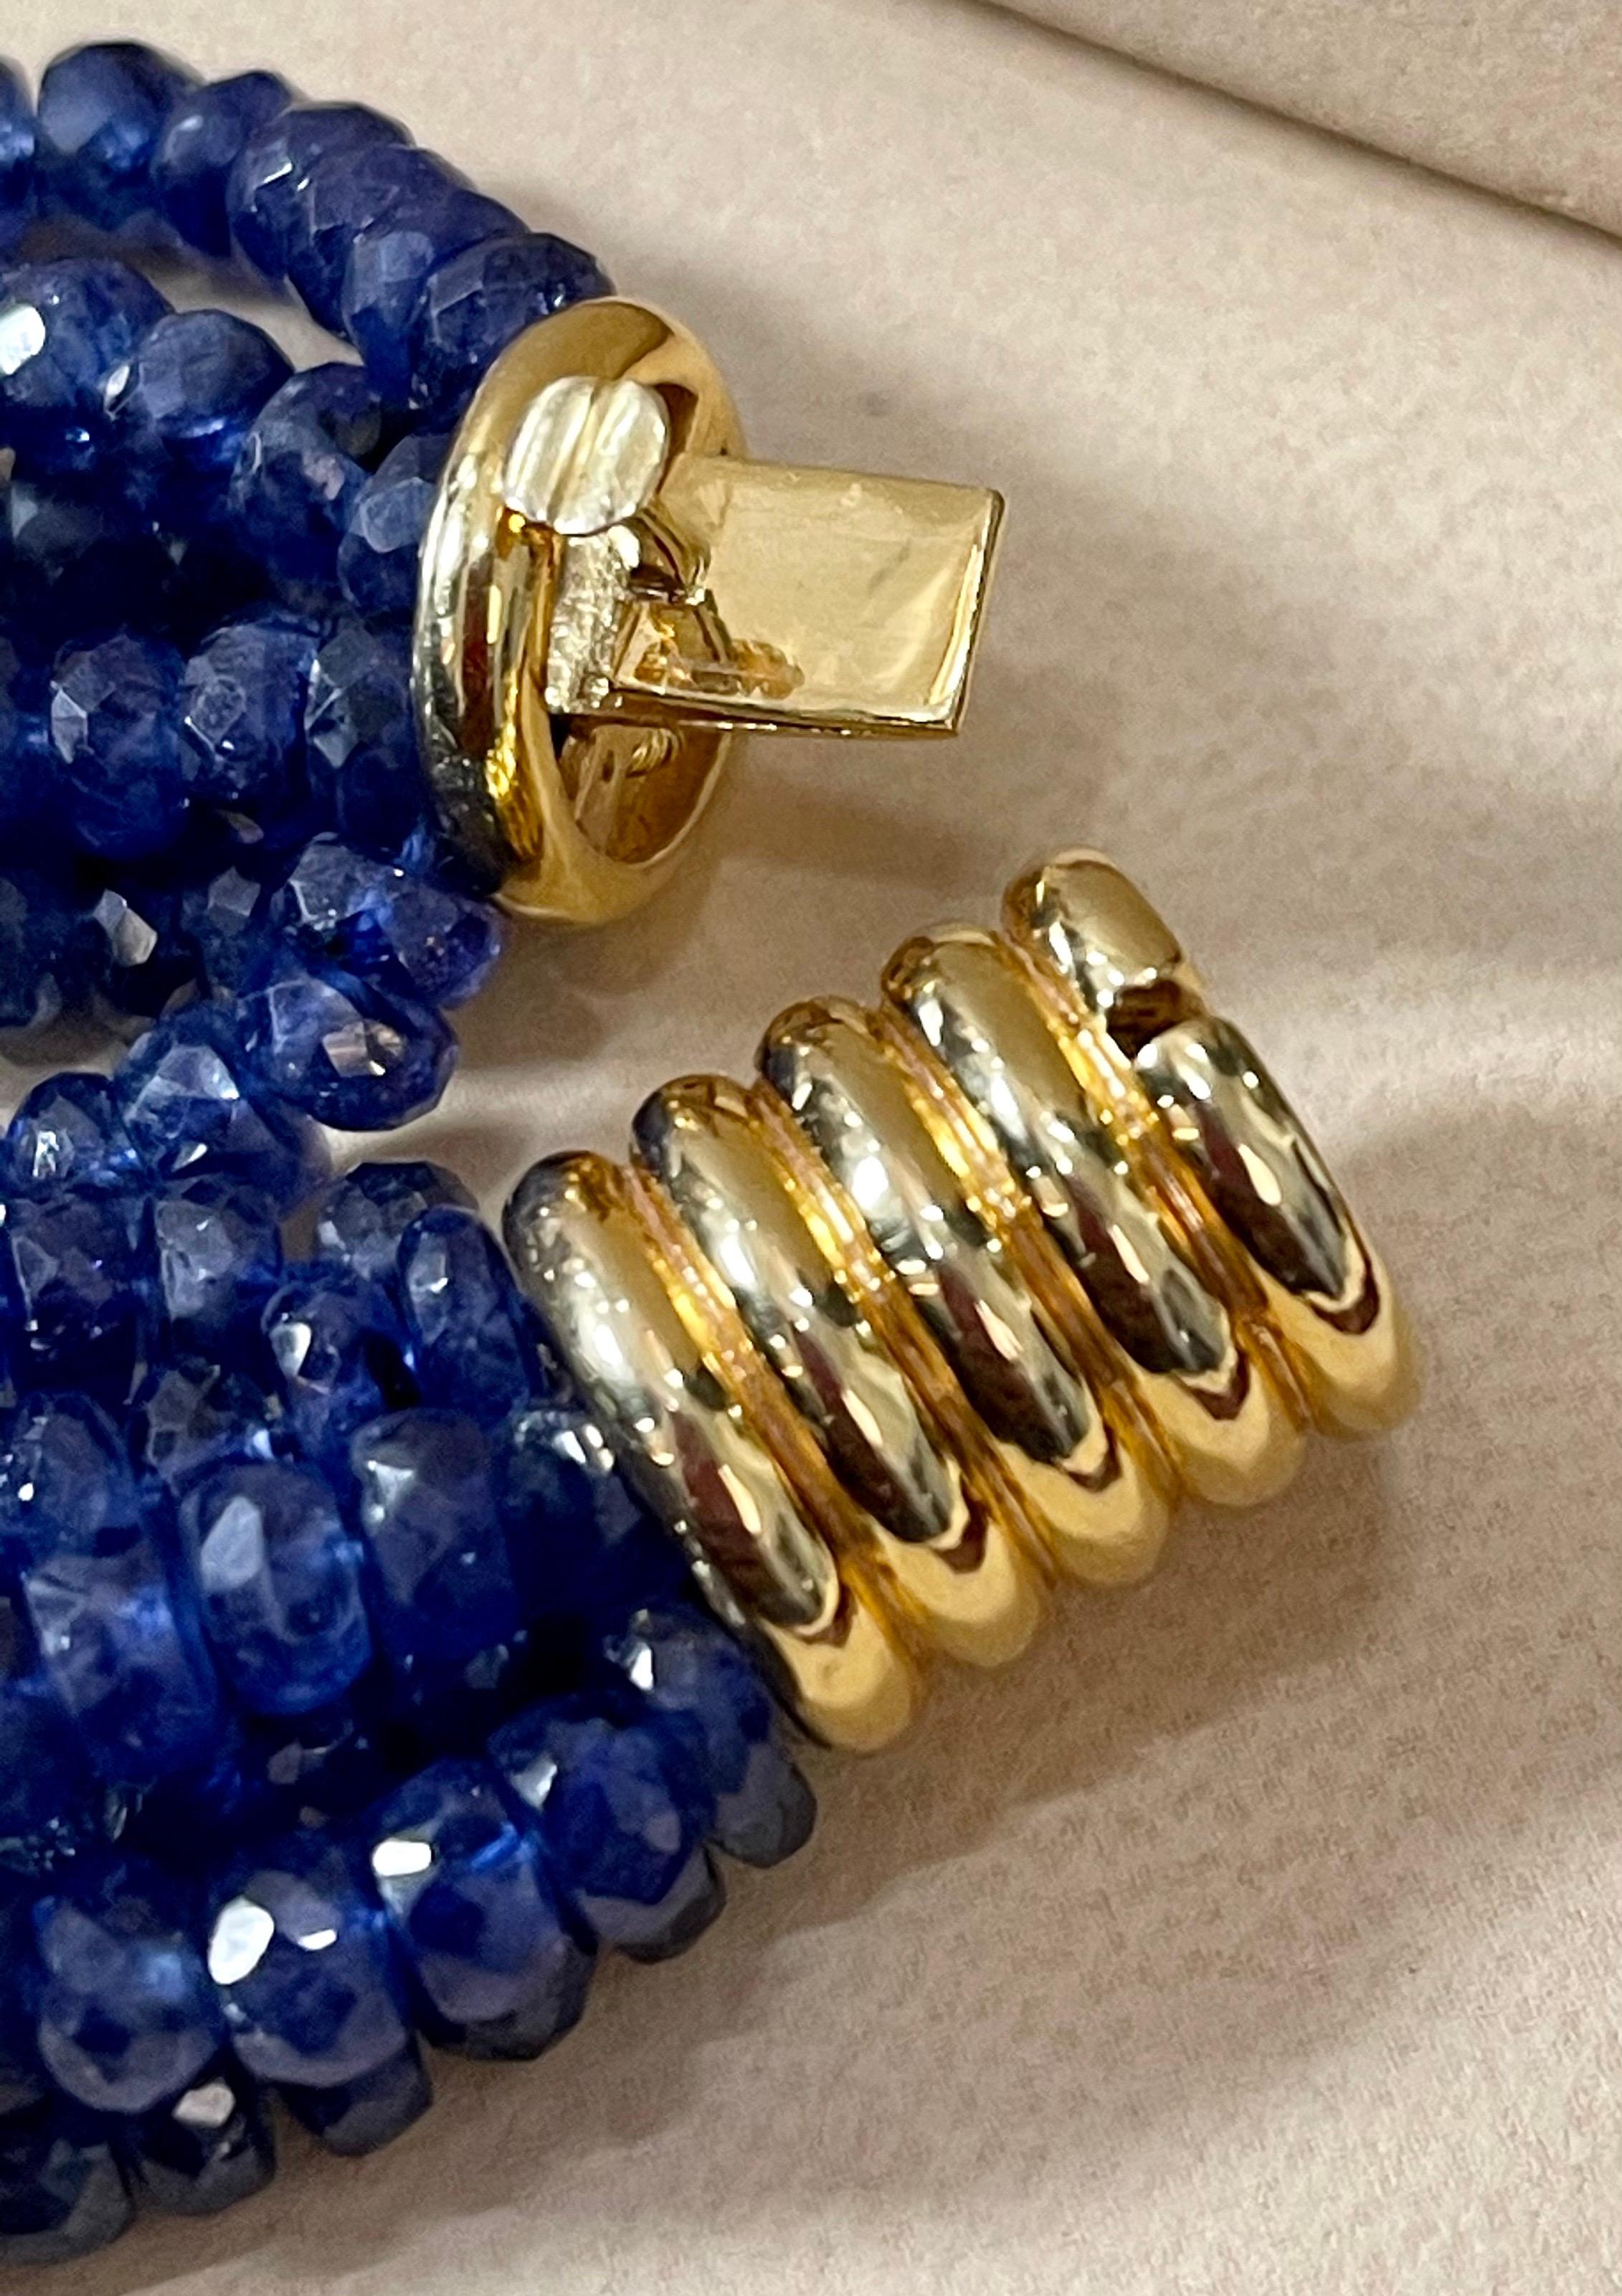 Twisted 1275 Ct Natural Tanzanite Bead Seven Strand Necklace + 15 Gm 14 K Y Gold For Sale 7